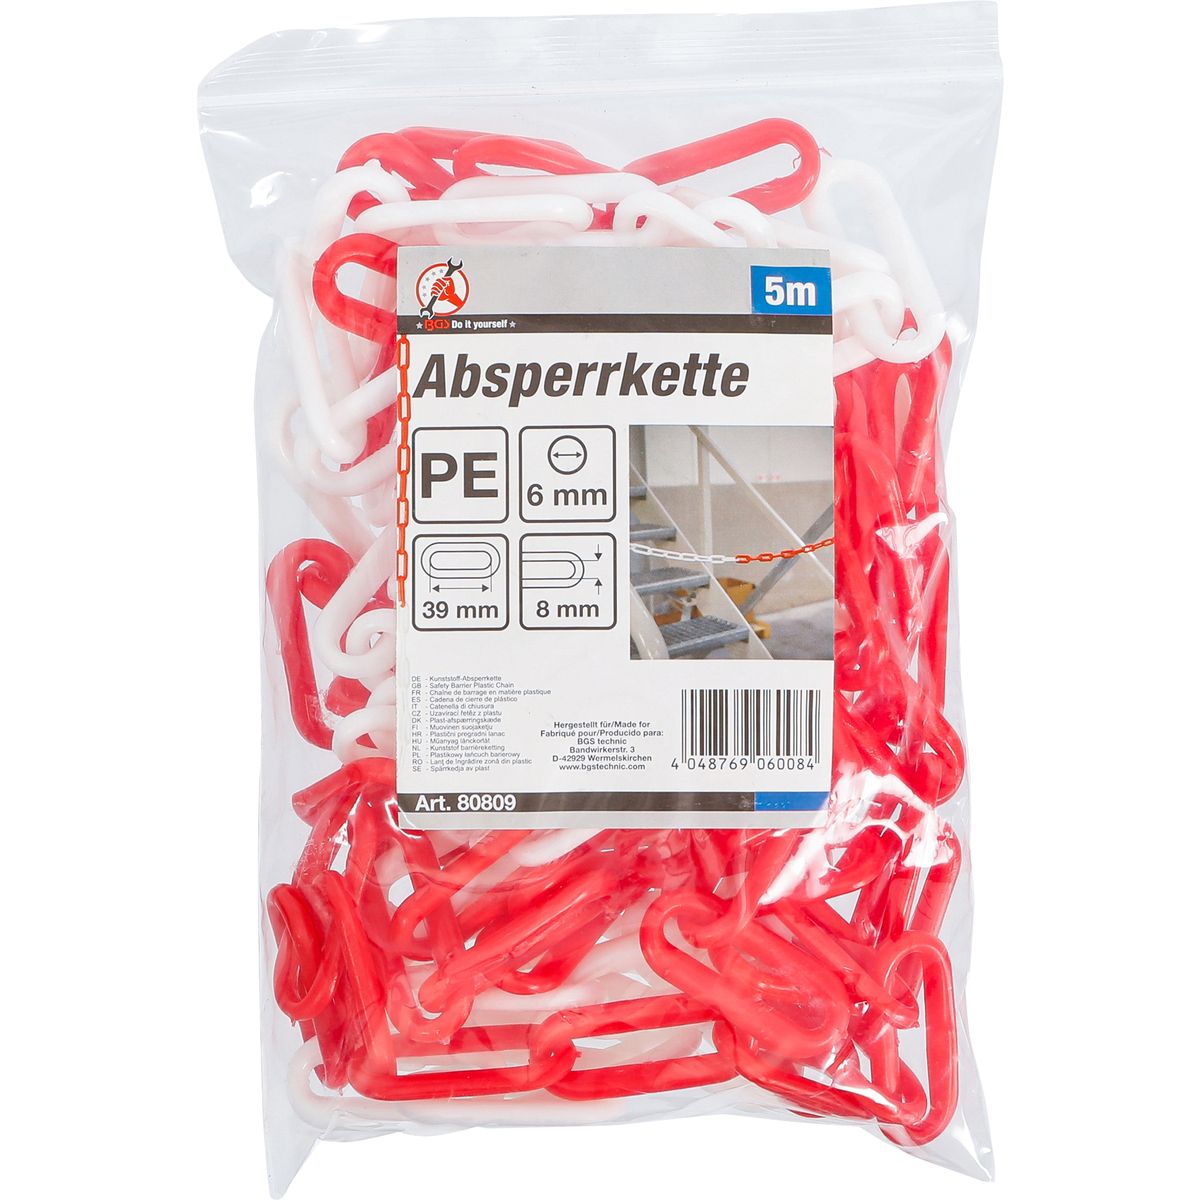 Barrier Chain | Red and White | Plastic | 5 m